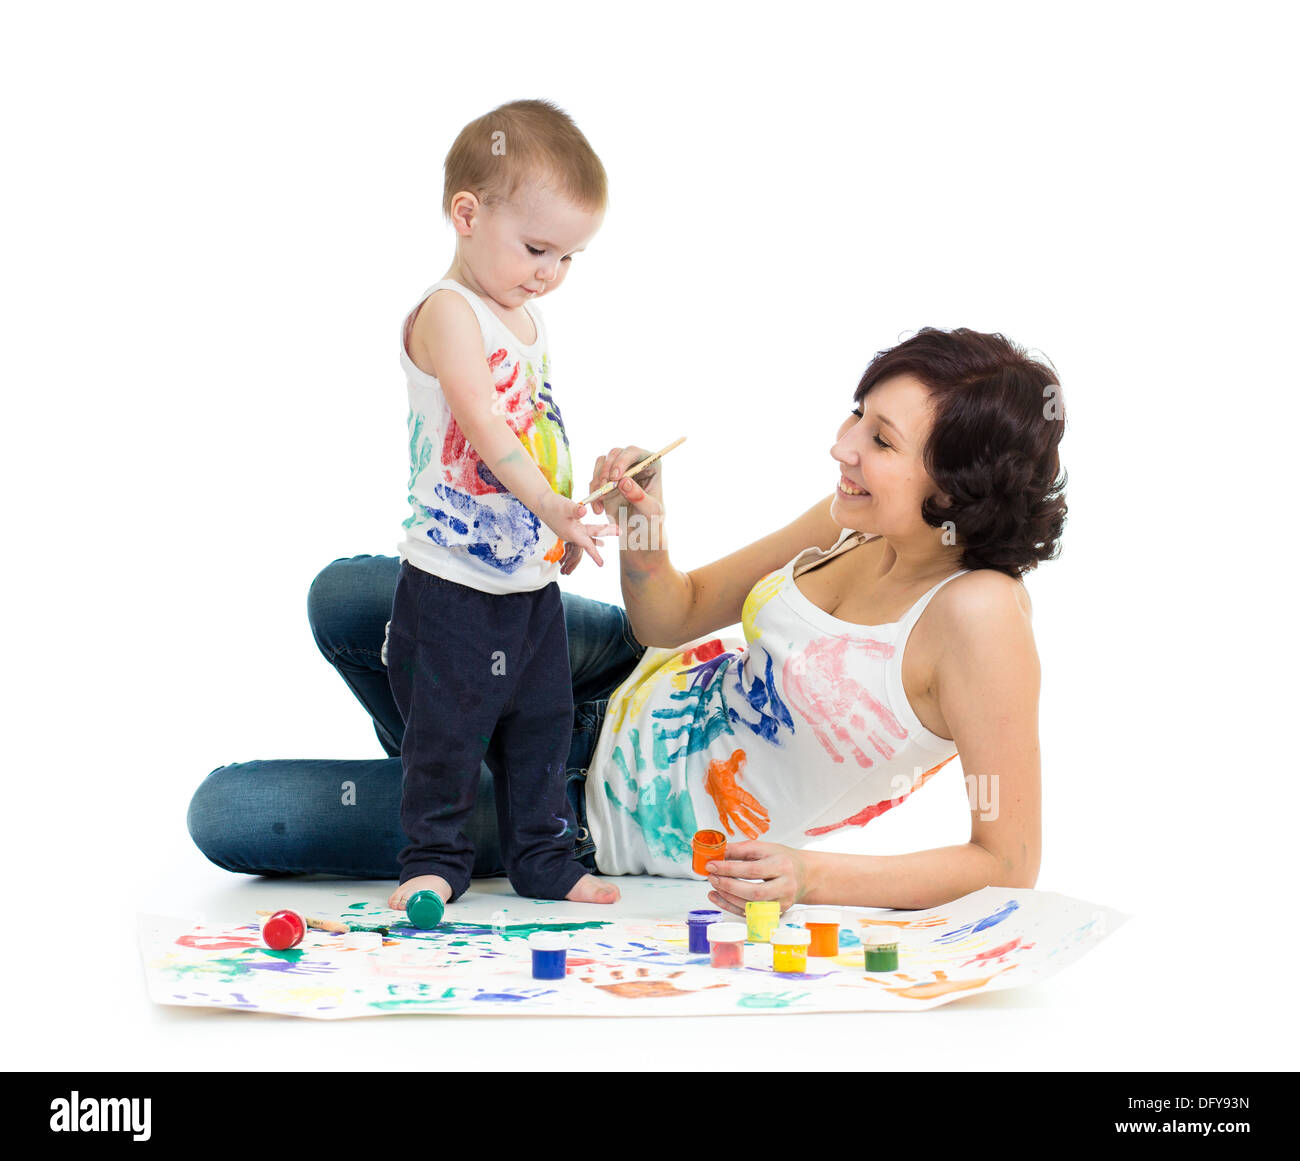 mother with kid boy drawing and painting together Stock Photo